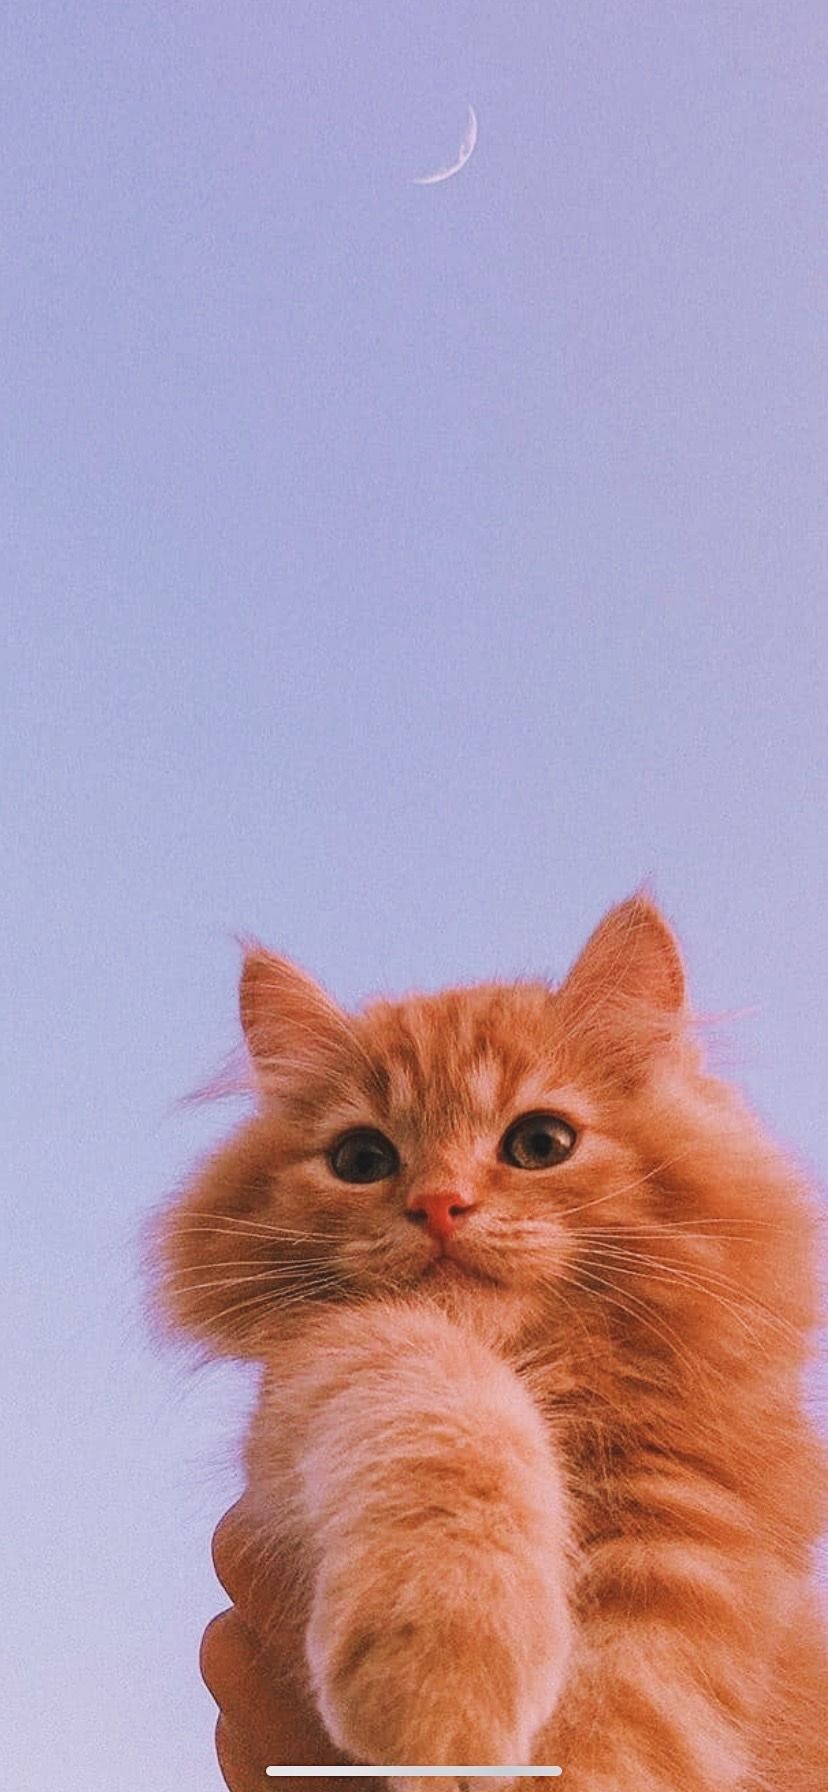 Cute Cat iPhone Wallpapers - 4k, HD Cute Cat iPhone Backgrounds on